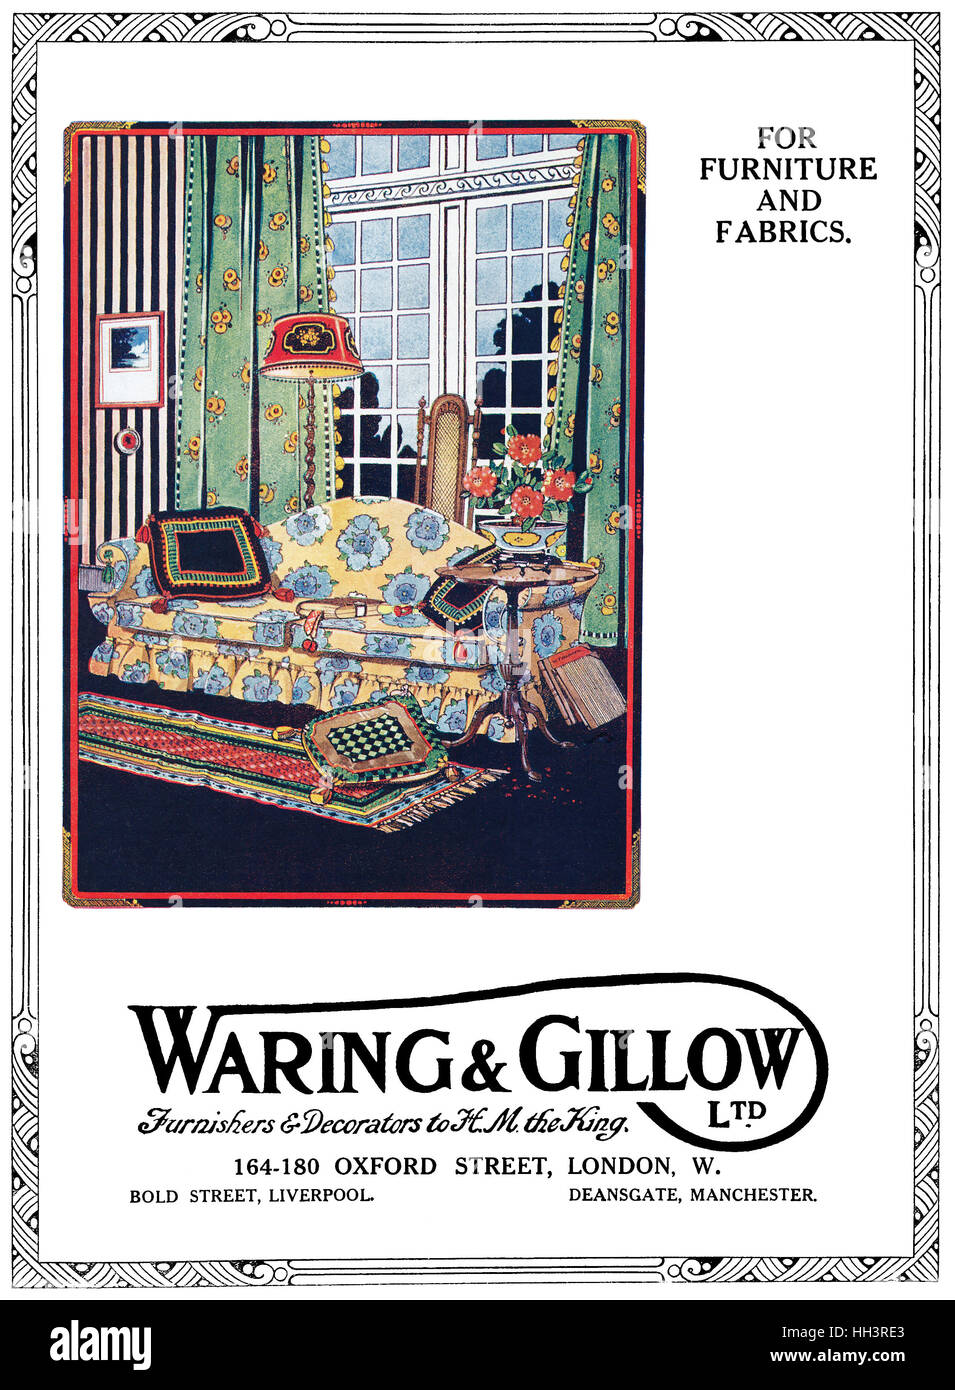 1917 British advertisement for Waring & Gillow furniture and fabrics Stock Photo